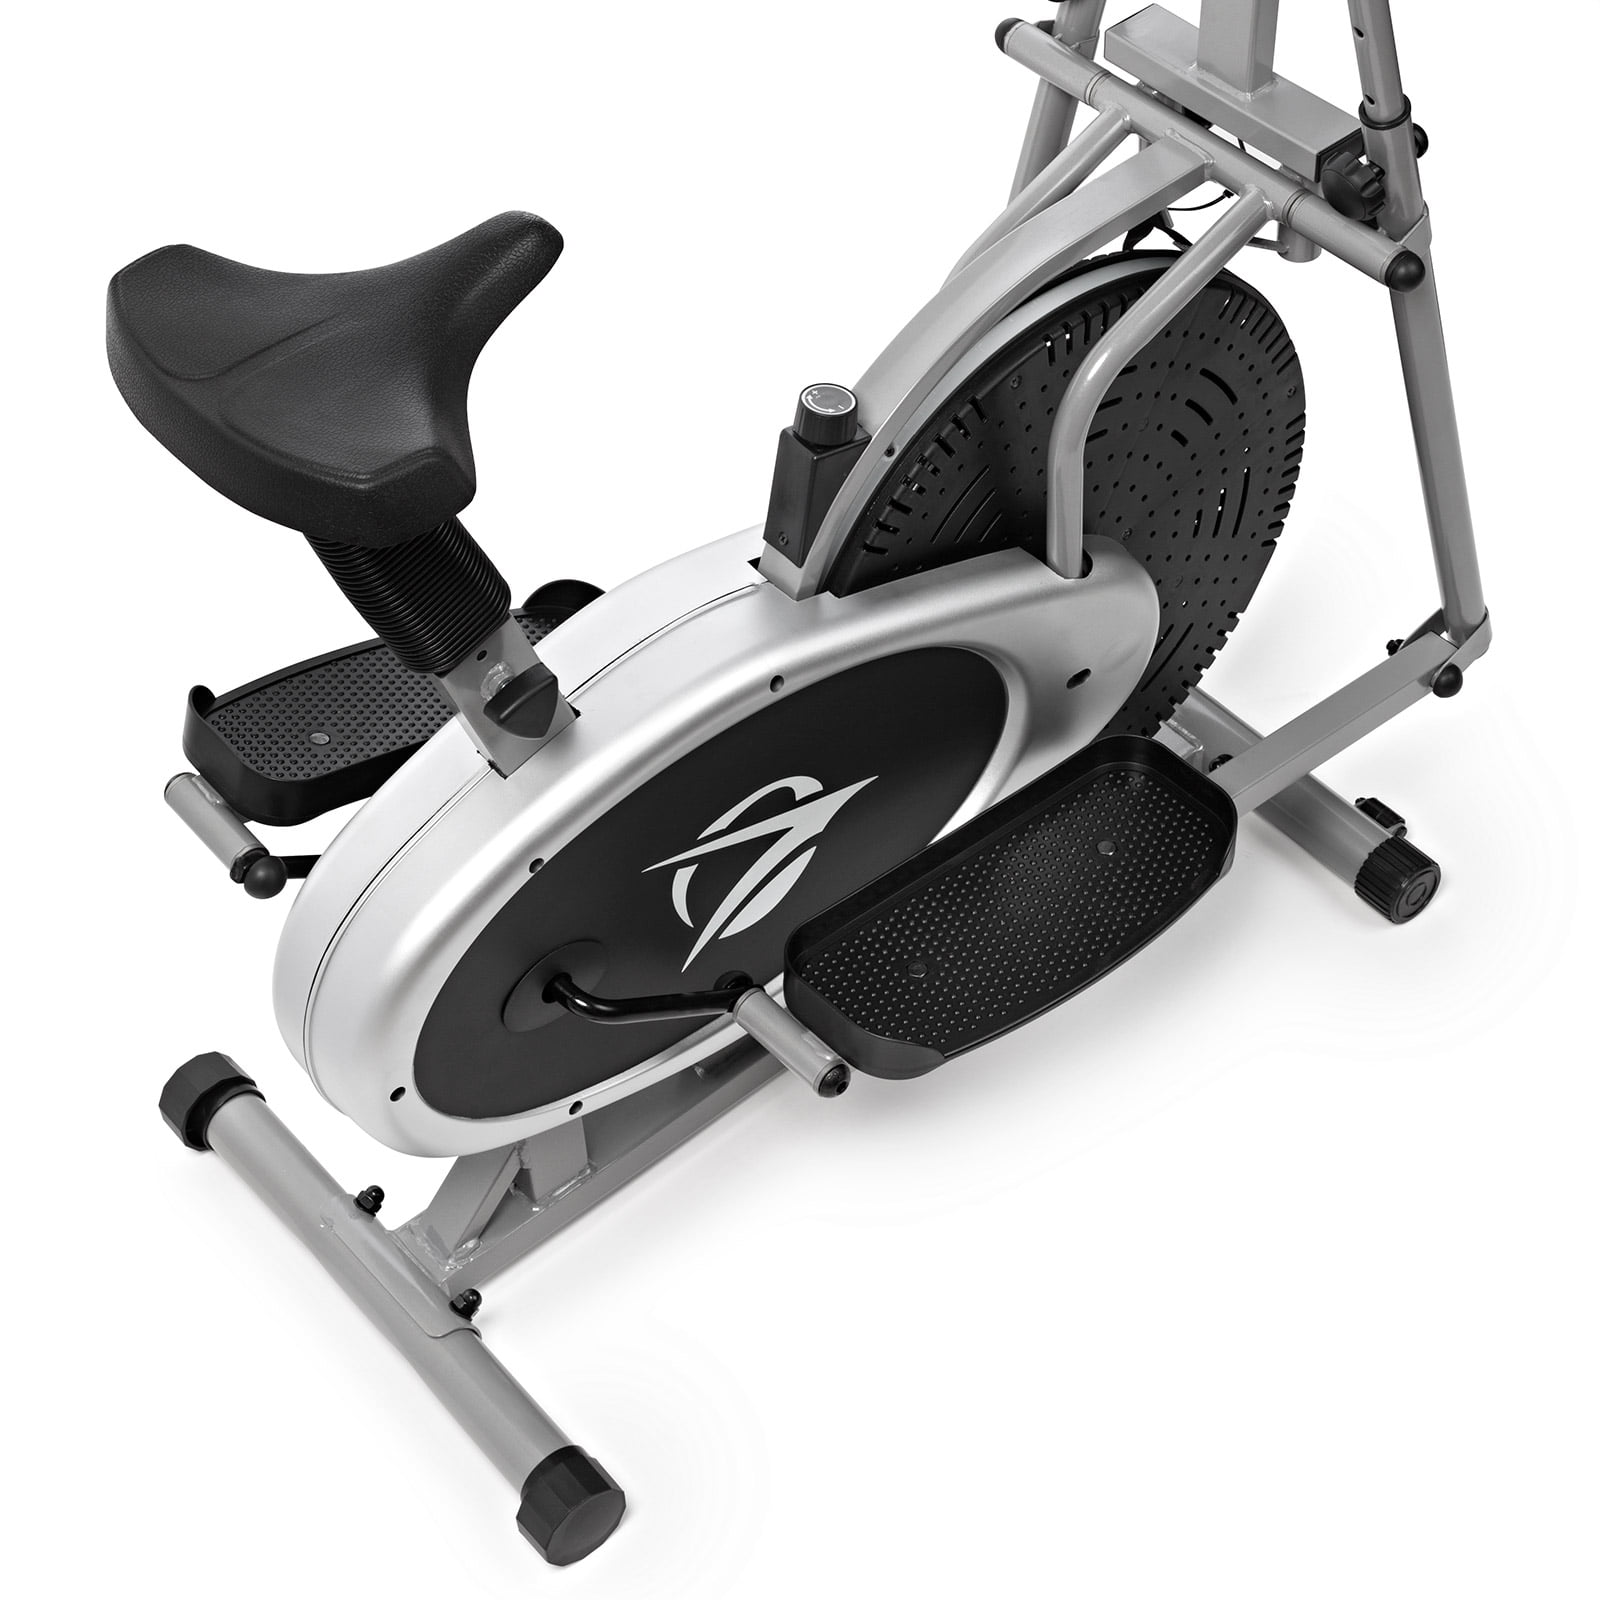 Elliptical Cross Trainer & Exercise Bike 2-IN-1 Home Cardio Workout Machine 